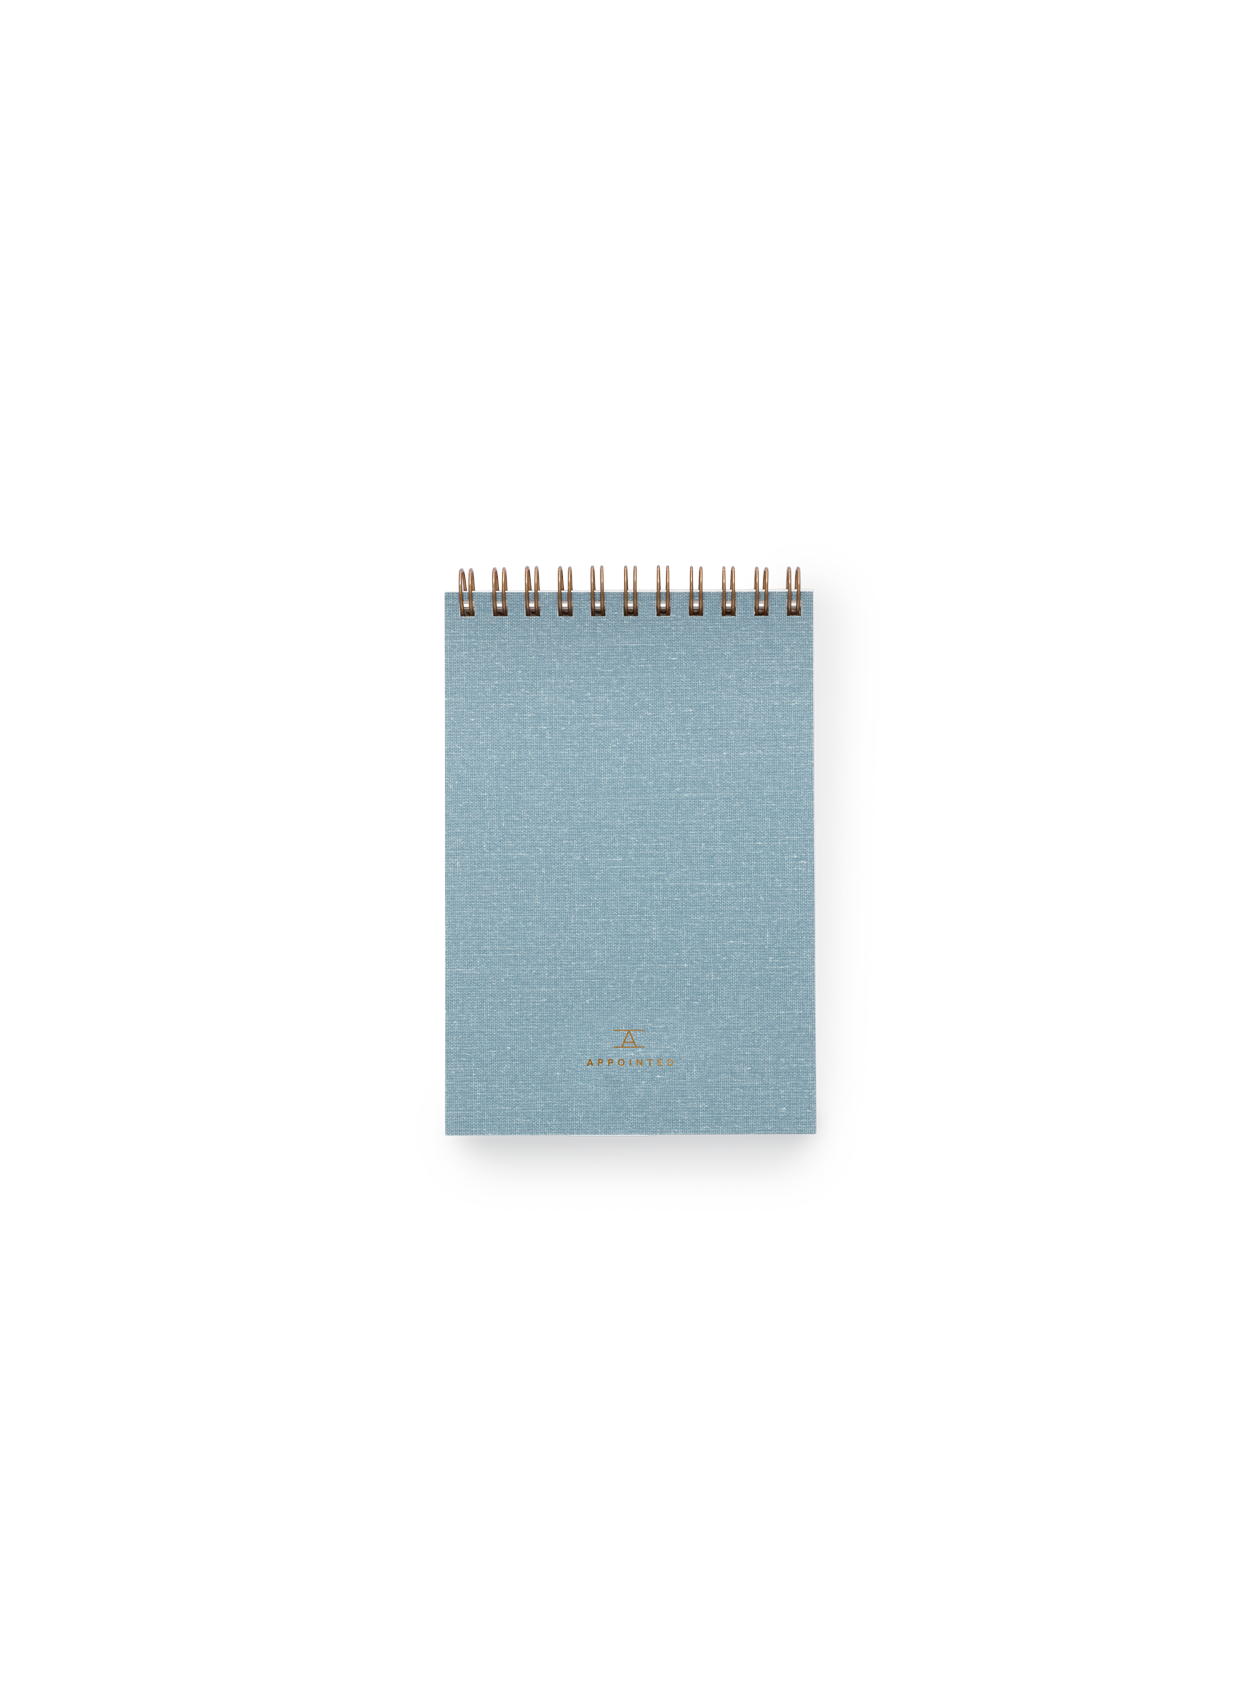 Appointed Pocket Notepad in Chambray Blue with brass wire-o binding front view || Chambray Blue